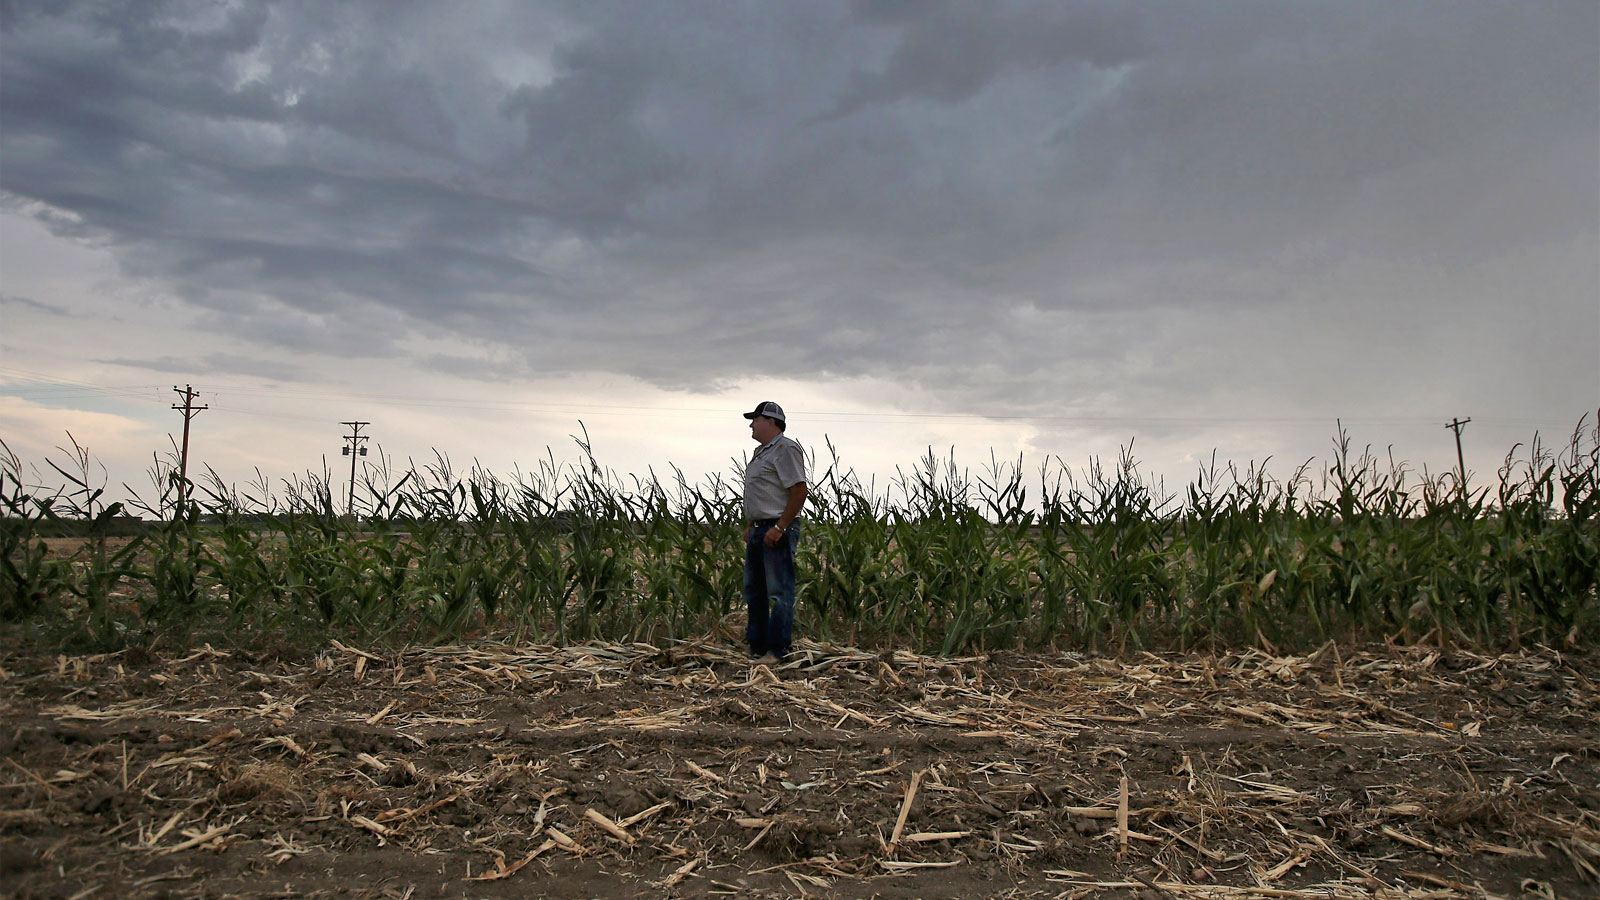 Farmer standing in corn field affected by drought